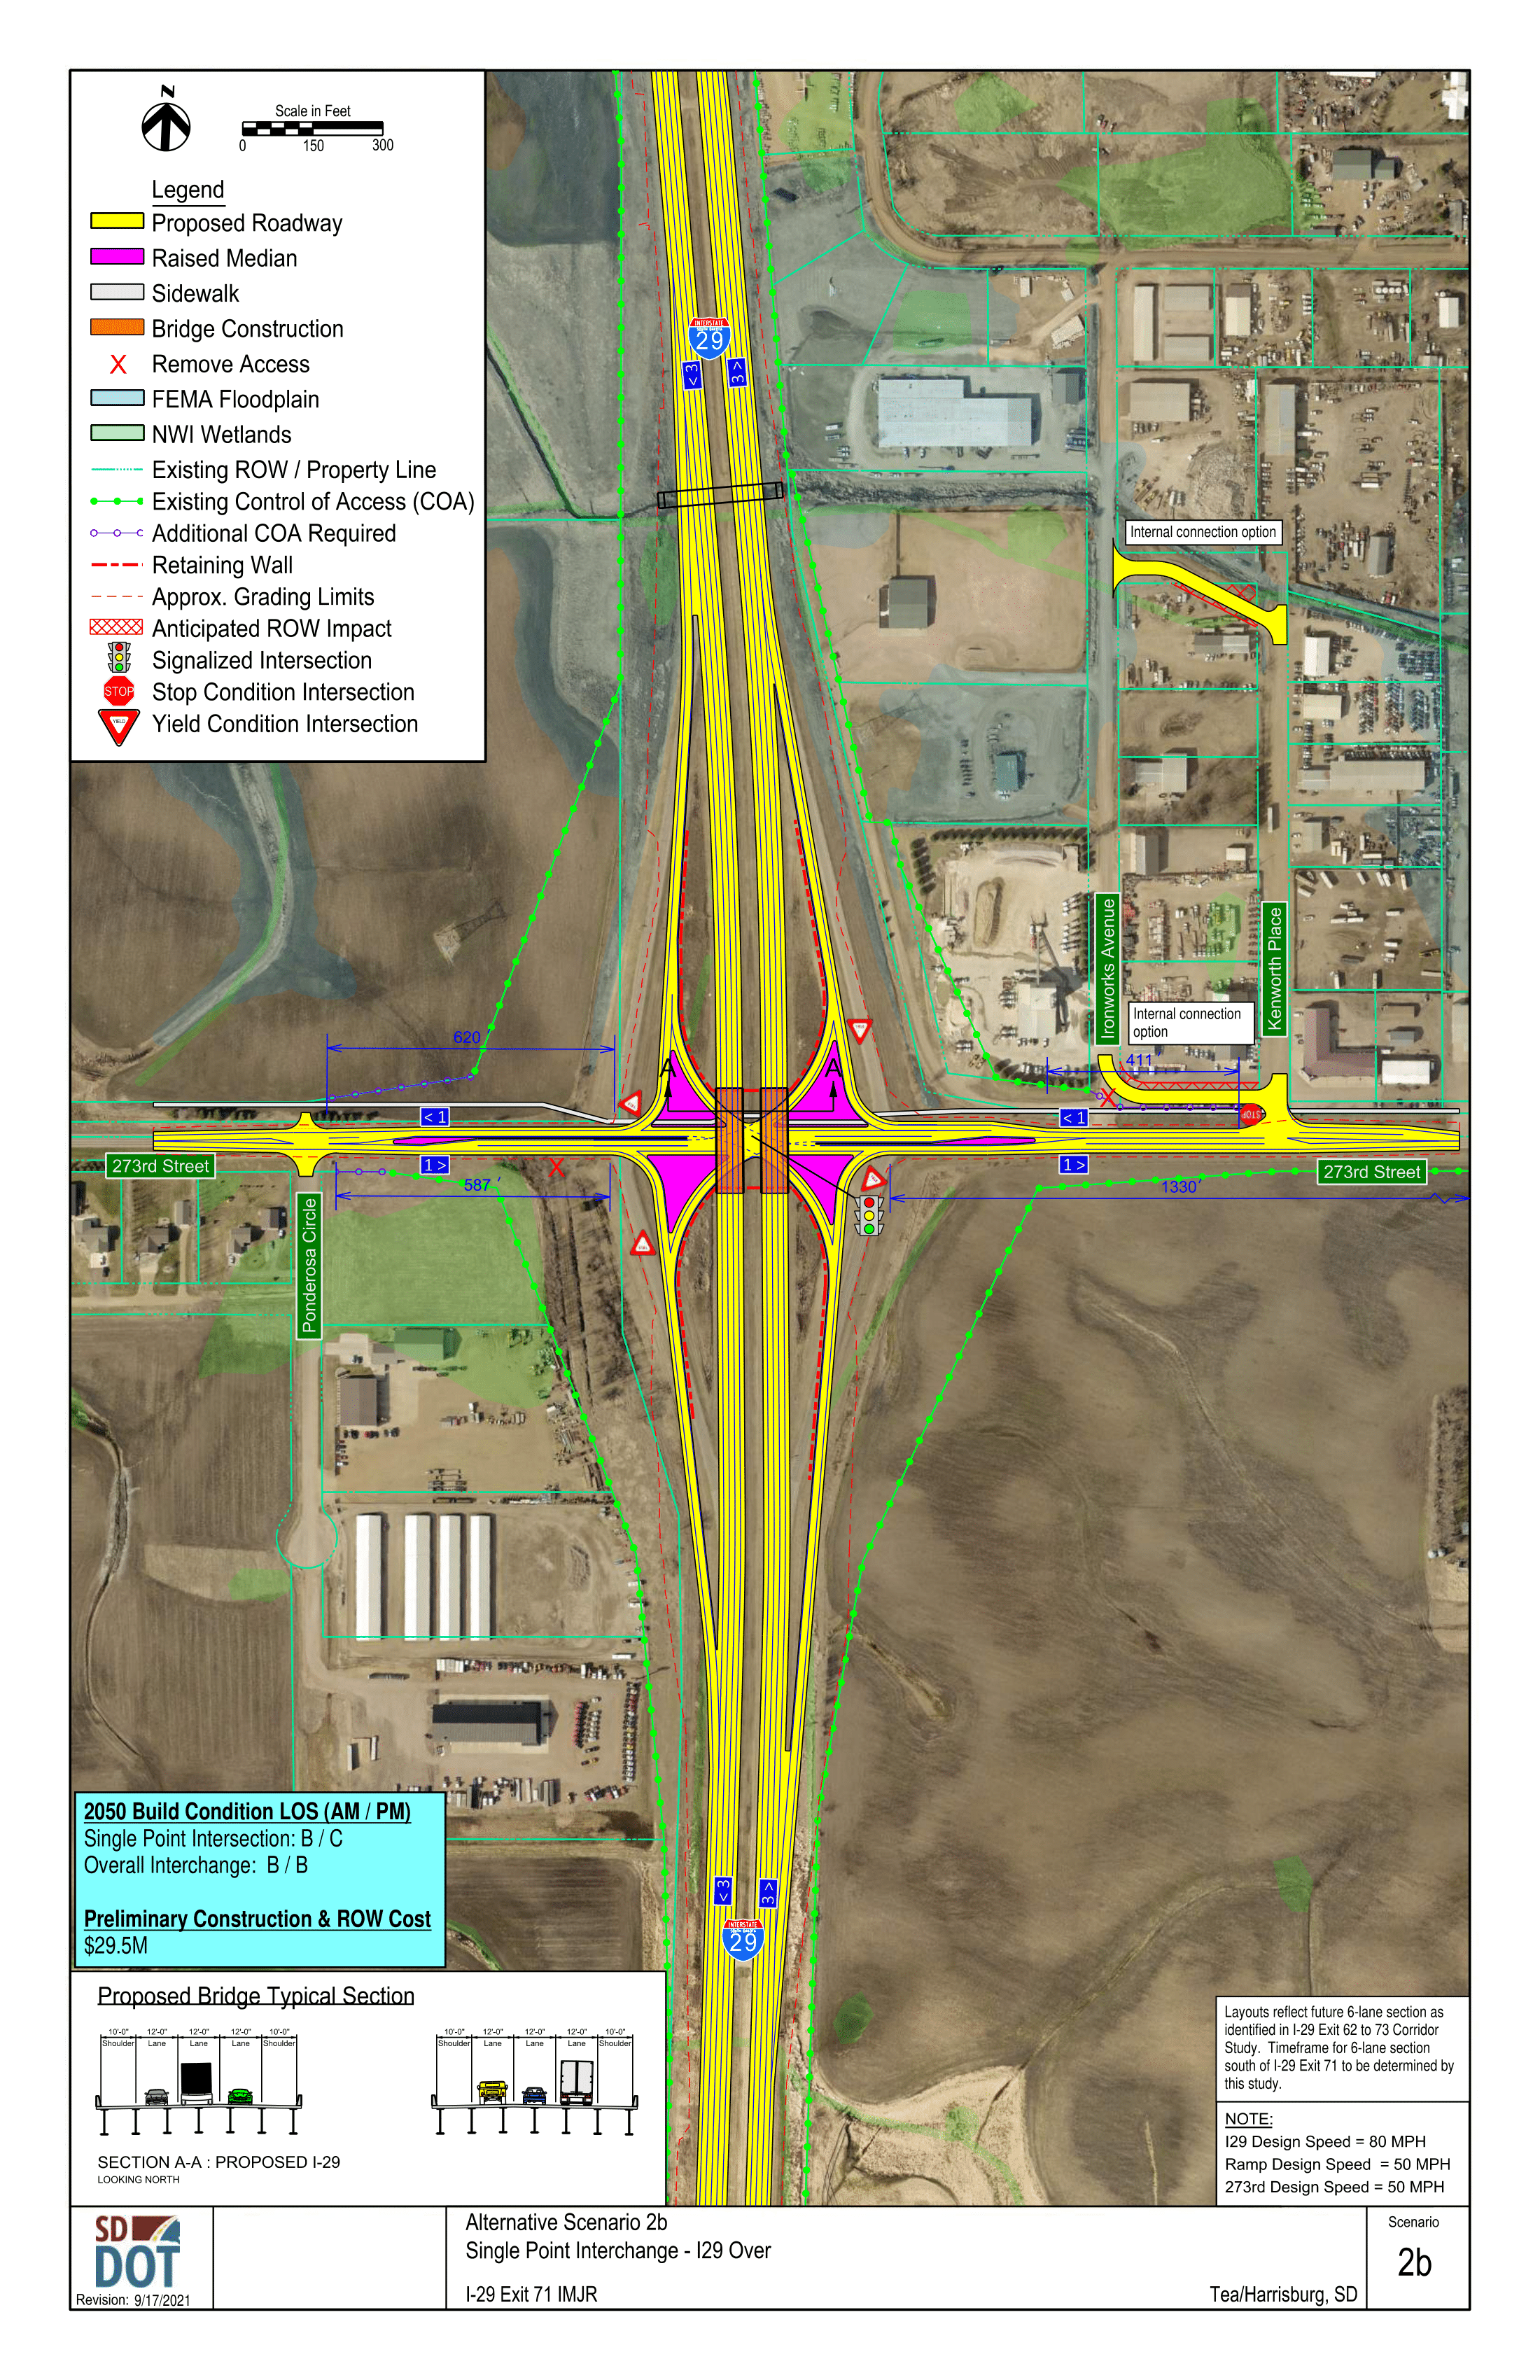 This image shows the conceptual layout of a Single Point Interchange, and what the road over it would look like. Details on the diagram include proposed roadway, raised median, sidewalk, bridge construction, access control, FEMA floodplain, NWI wetlands, existing Right of Ways and property lines, existing control of access points, additional control of access points needed, retaining walls, grading limits, anticipated right of way impacts, signalized intersections, stop condition intersections and yield condition intersections.